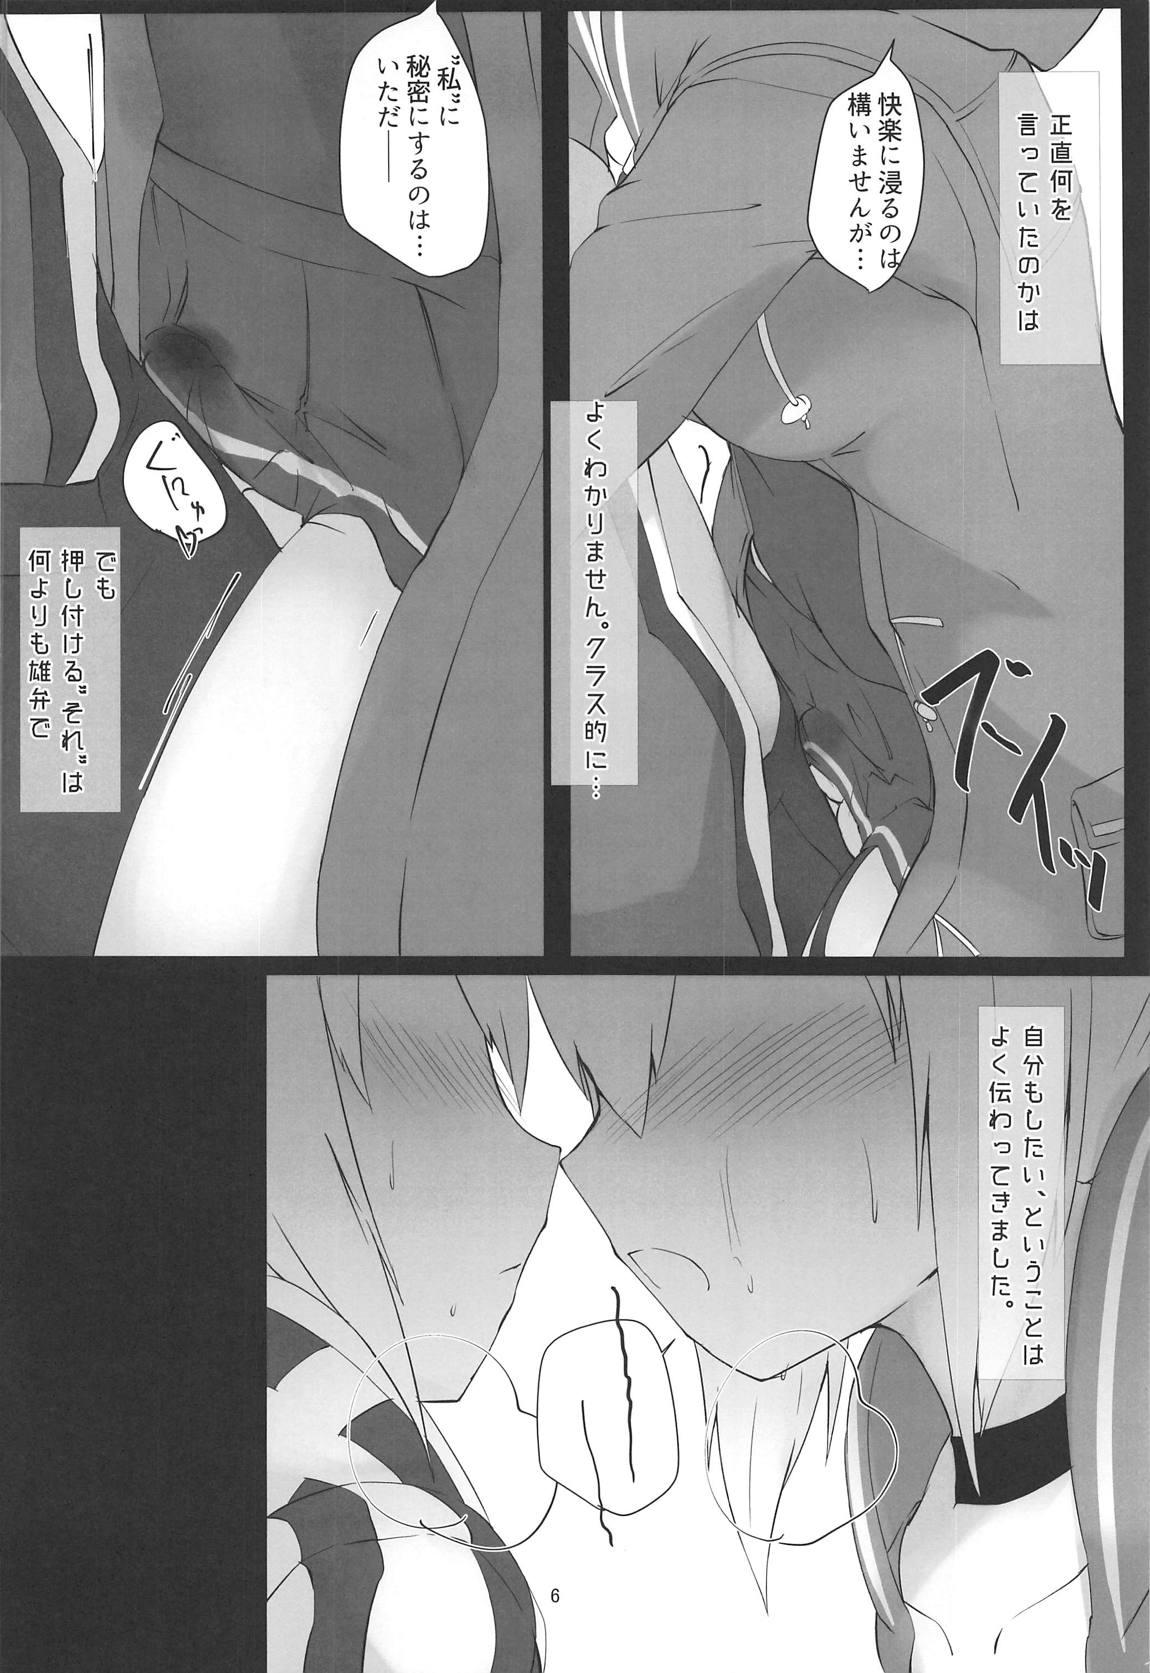 Indo eXXpose herself+ - Fate grand order Gorda - Page 5